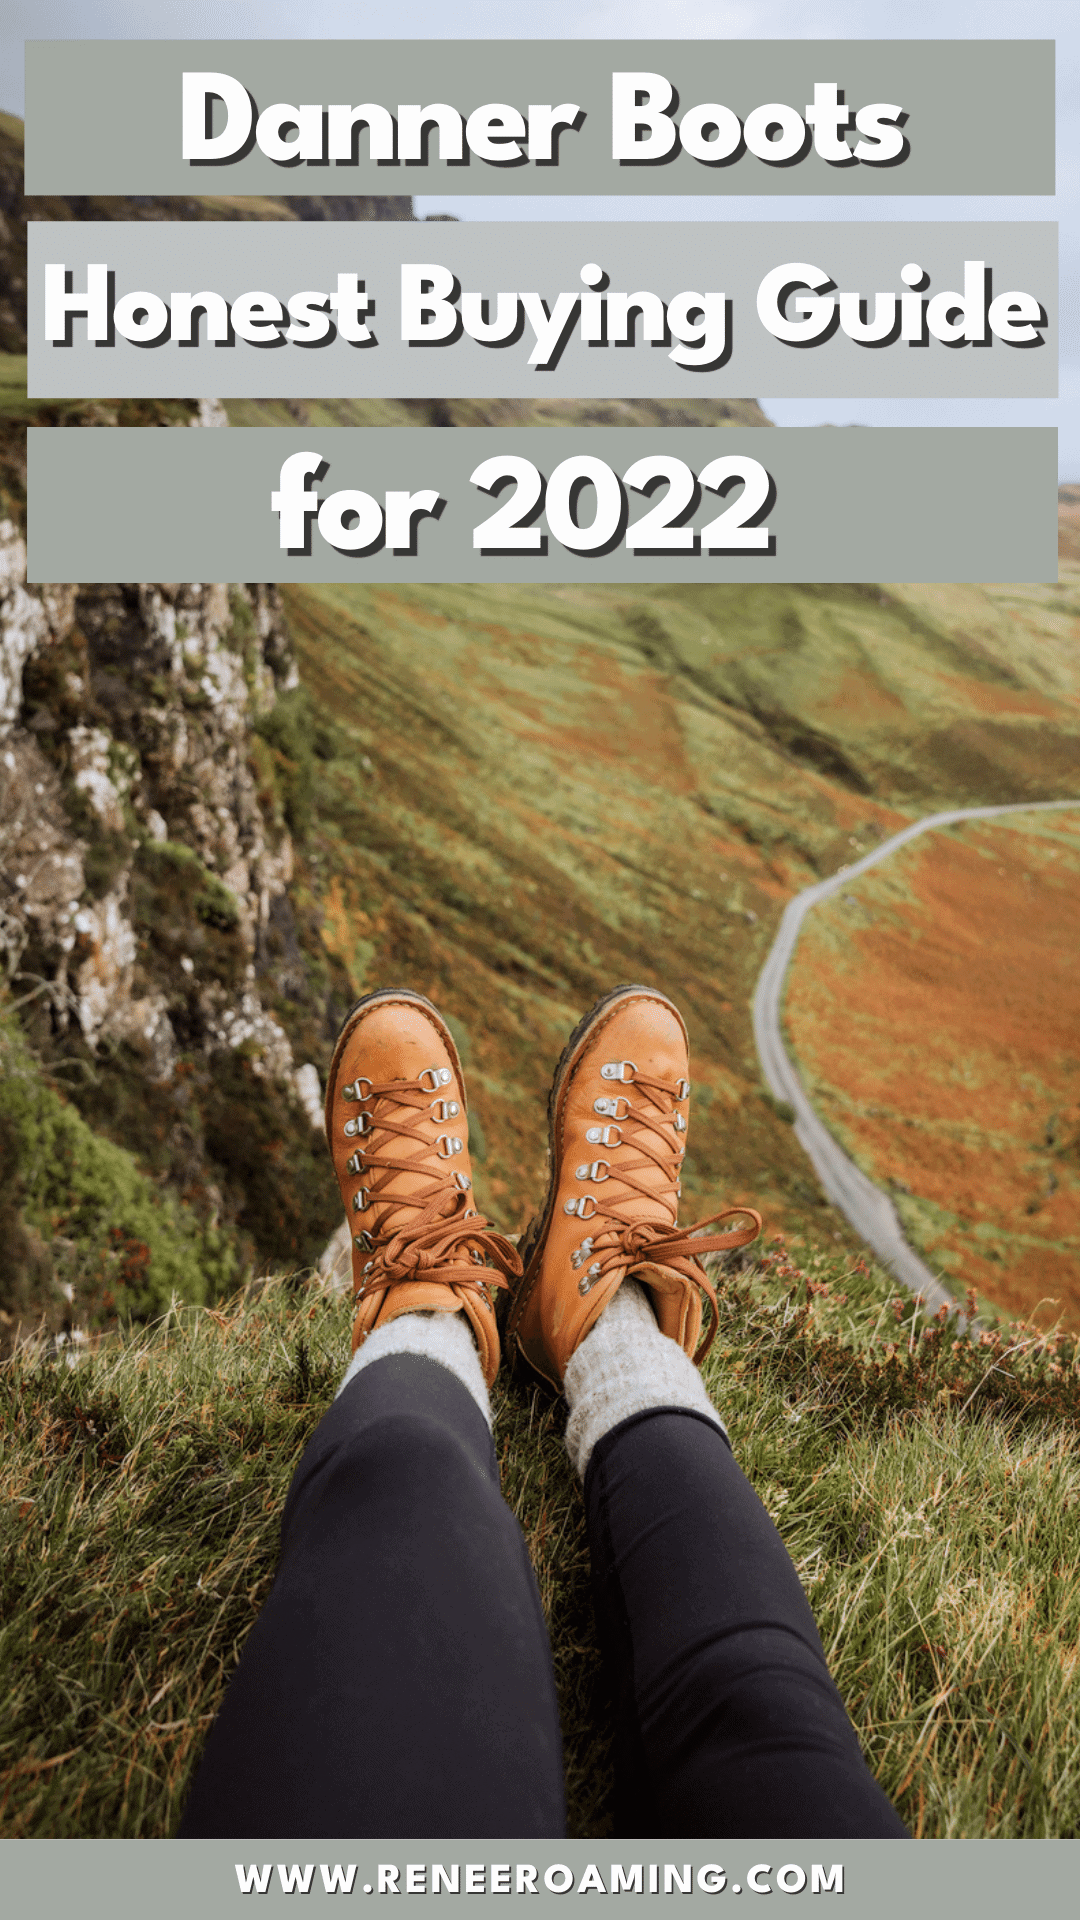 Danner Boots Honest Review and Buying Guide For 2022